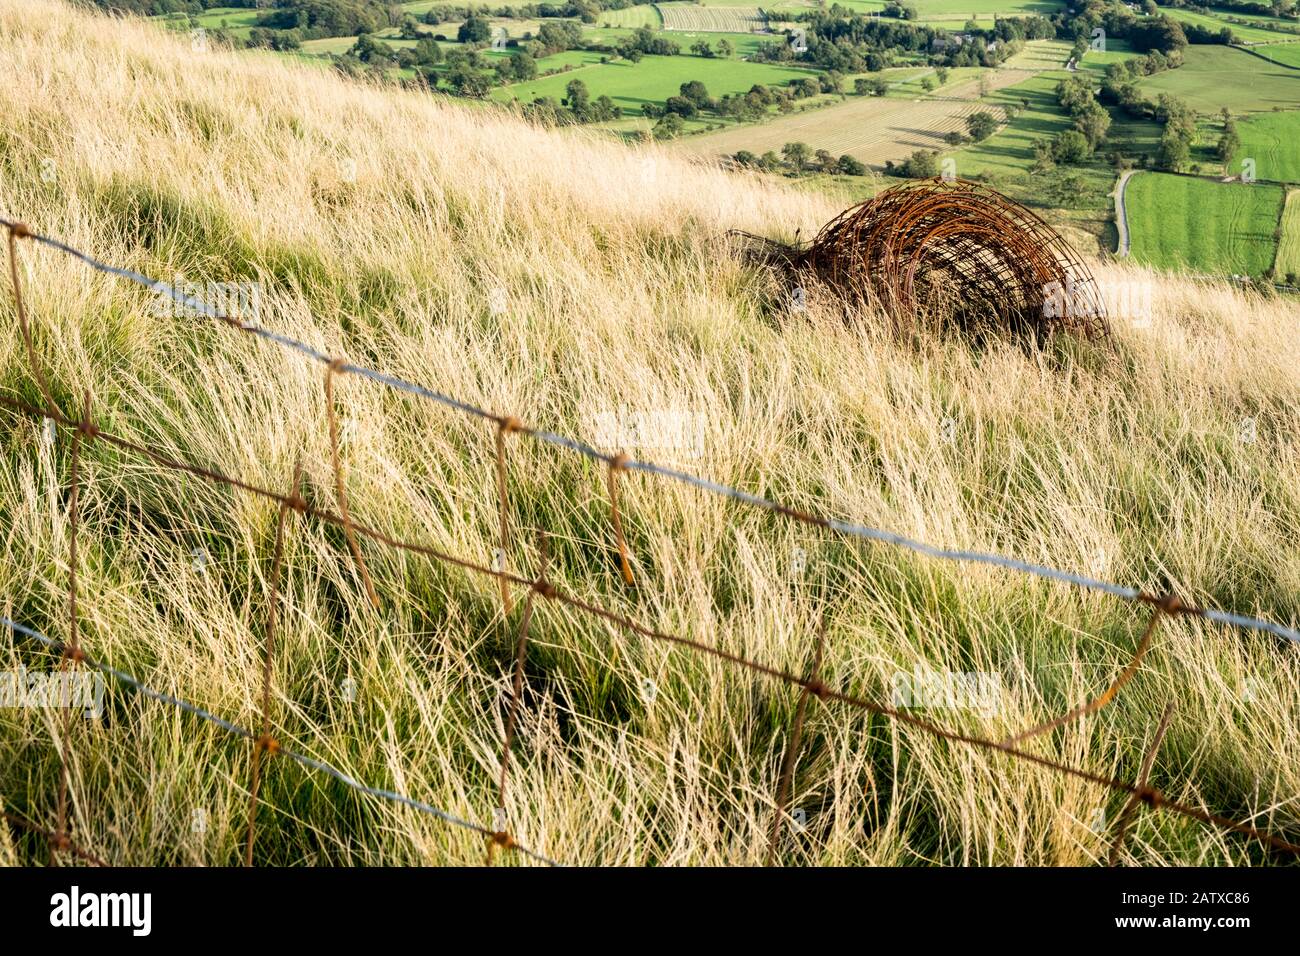 Rubbish in the countryside. An unwanted roll of rusting wire fencing discarded and left on farmland, The Great Ridge, Derbyshire, England, UK Stock Photo